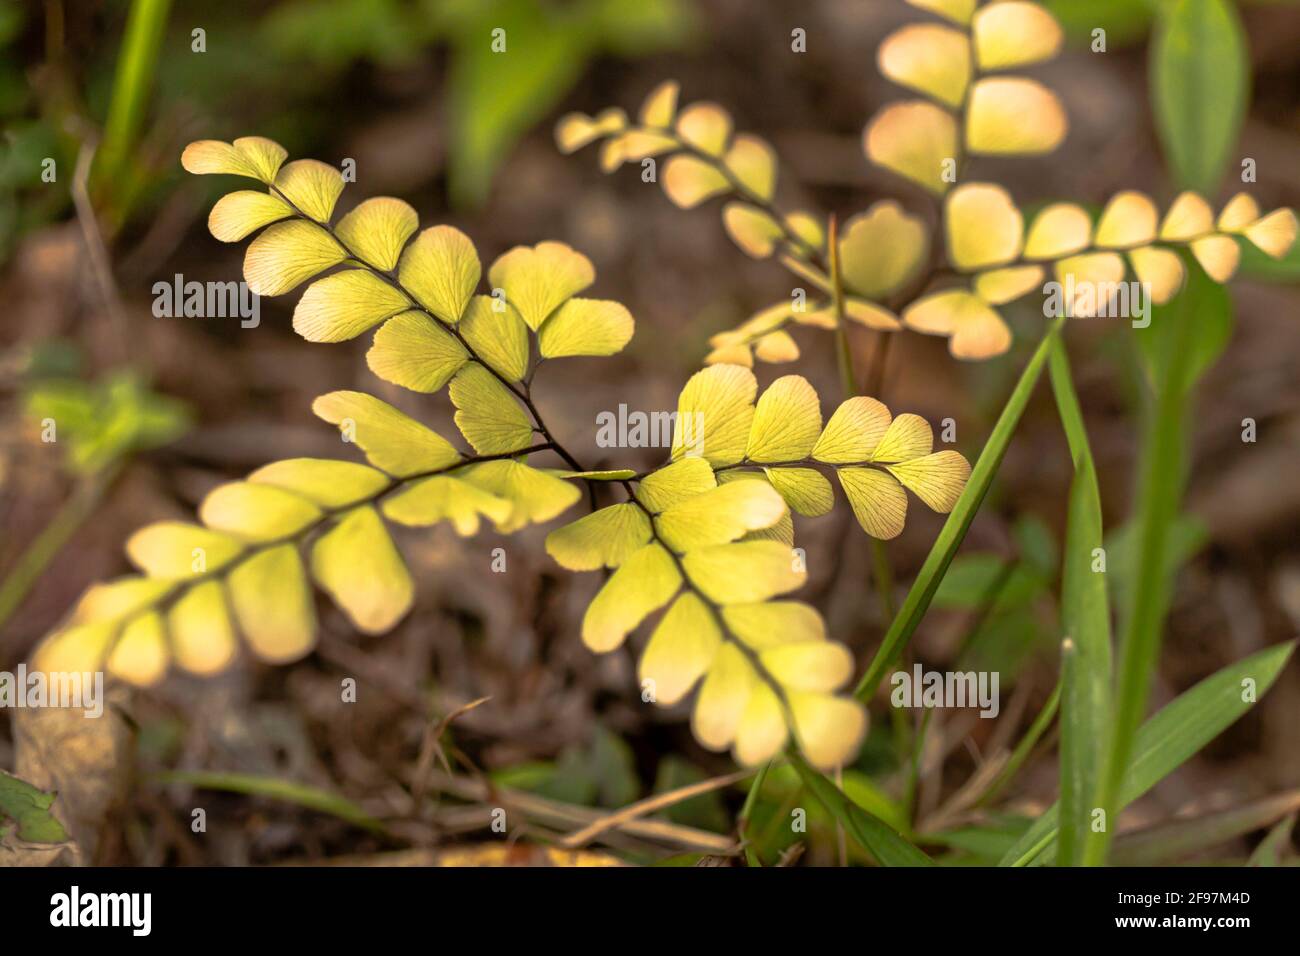 Small Fan-leaved Maidenhair. Stock Photo